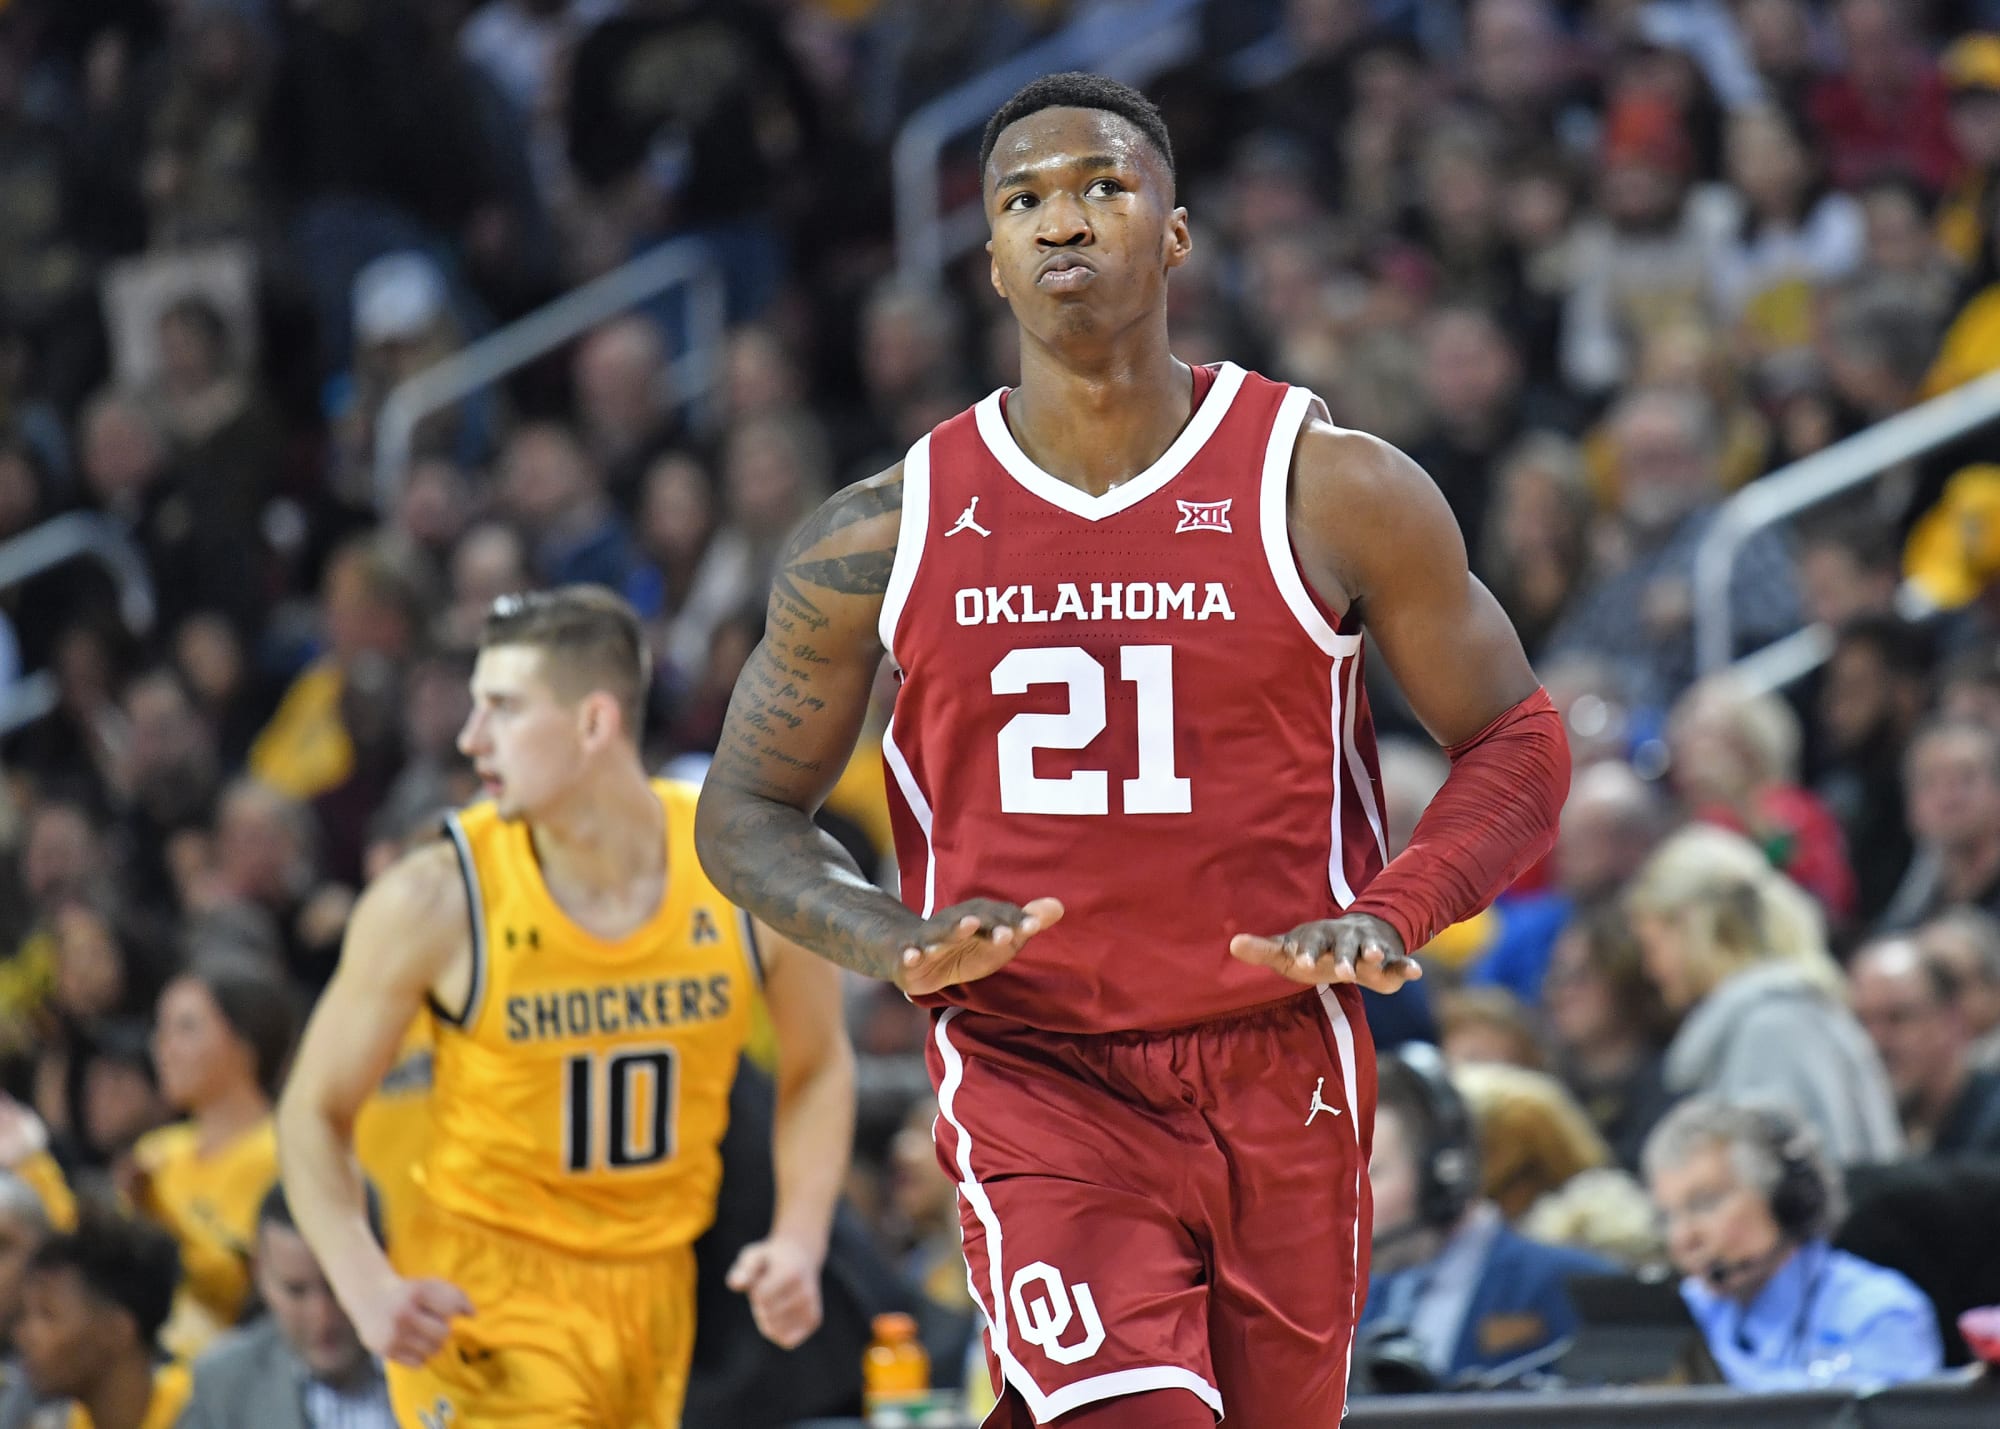 Oklahoma basketball Notable names and numbers from a Sooner power surge